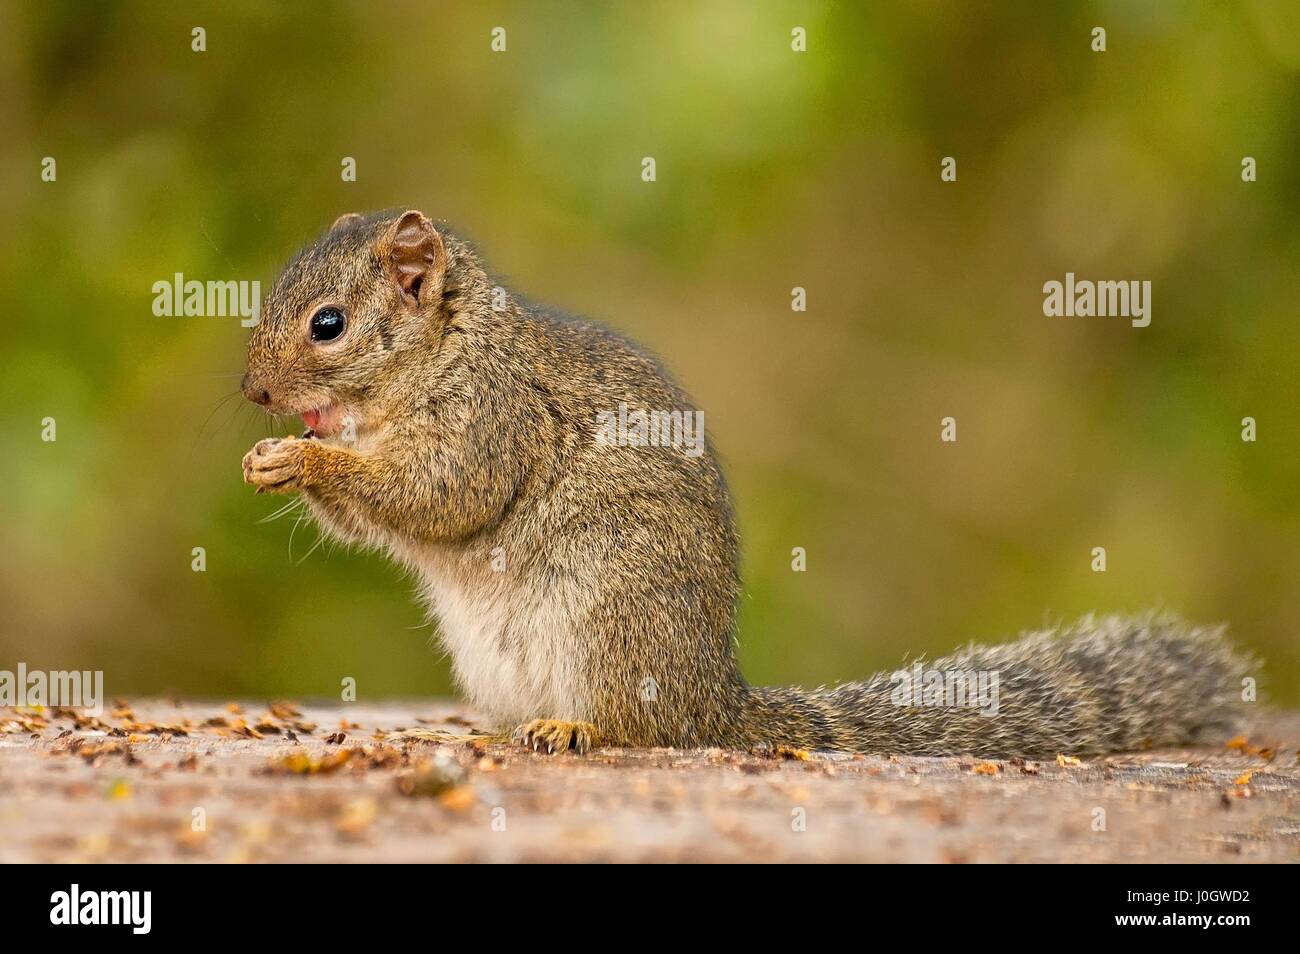 The African bush squirrels are a genus, Paraxerus, squirrels of the subfamily Xerinae. They are only found in Africa. Aberdare National Park, Kenya Stock Photo